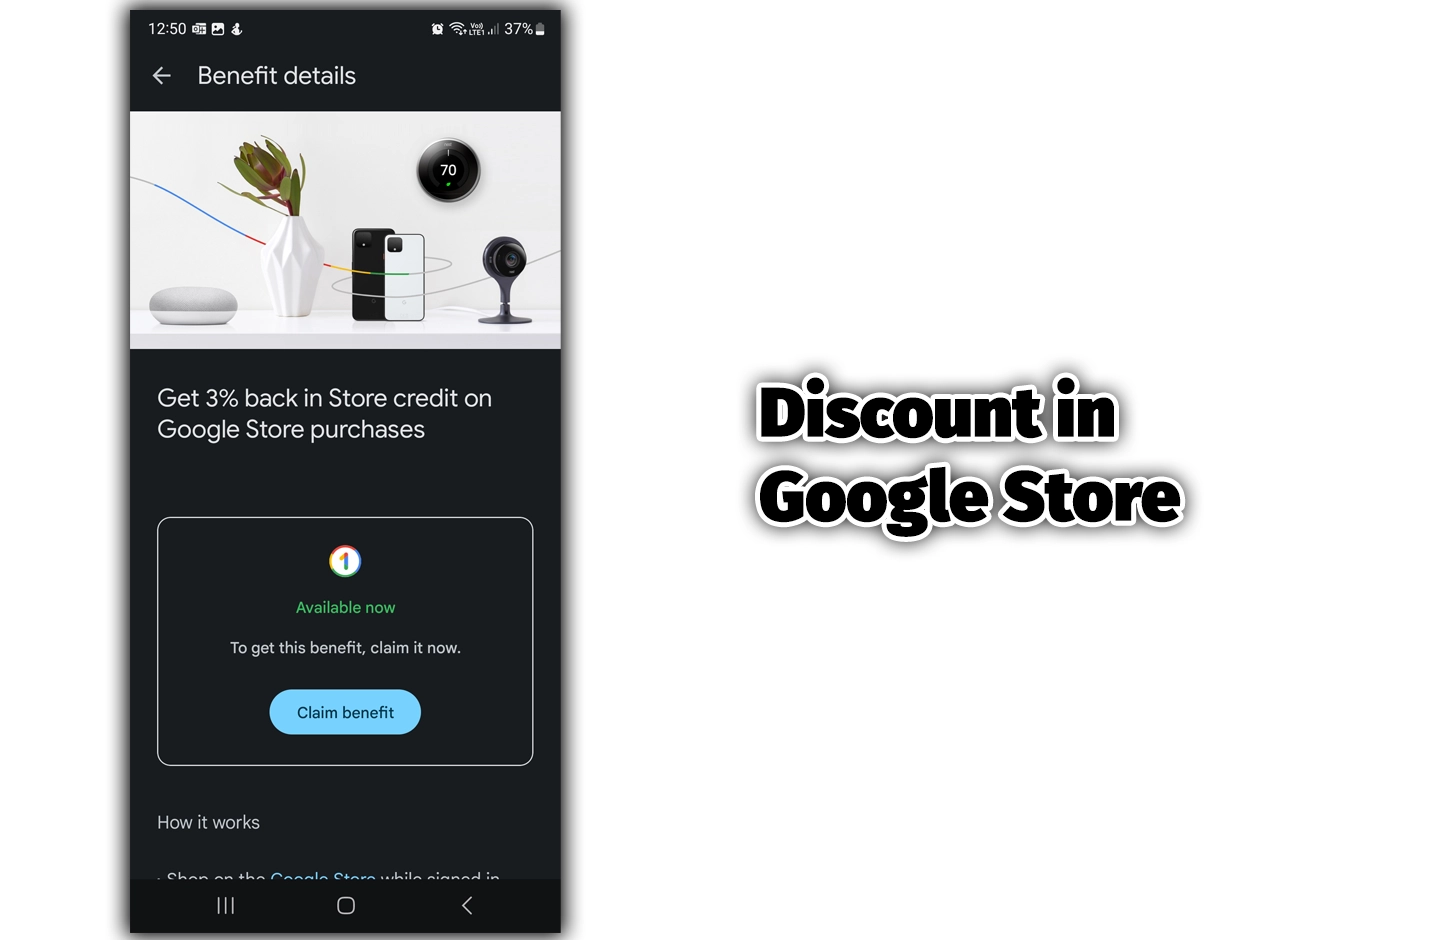 Google One Discount in Google Store